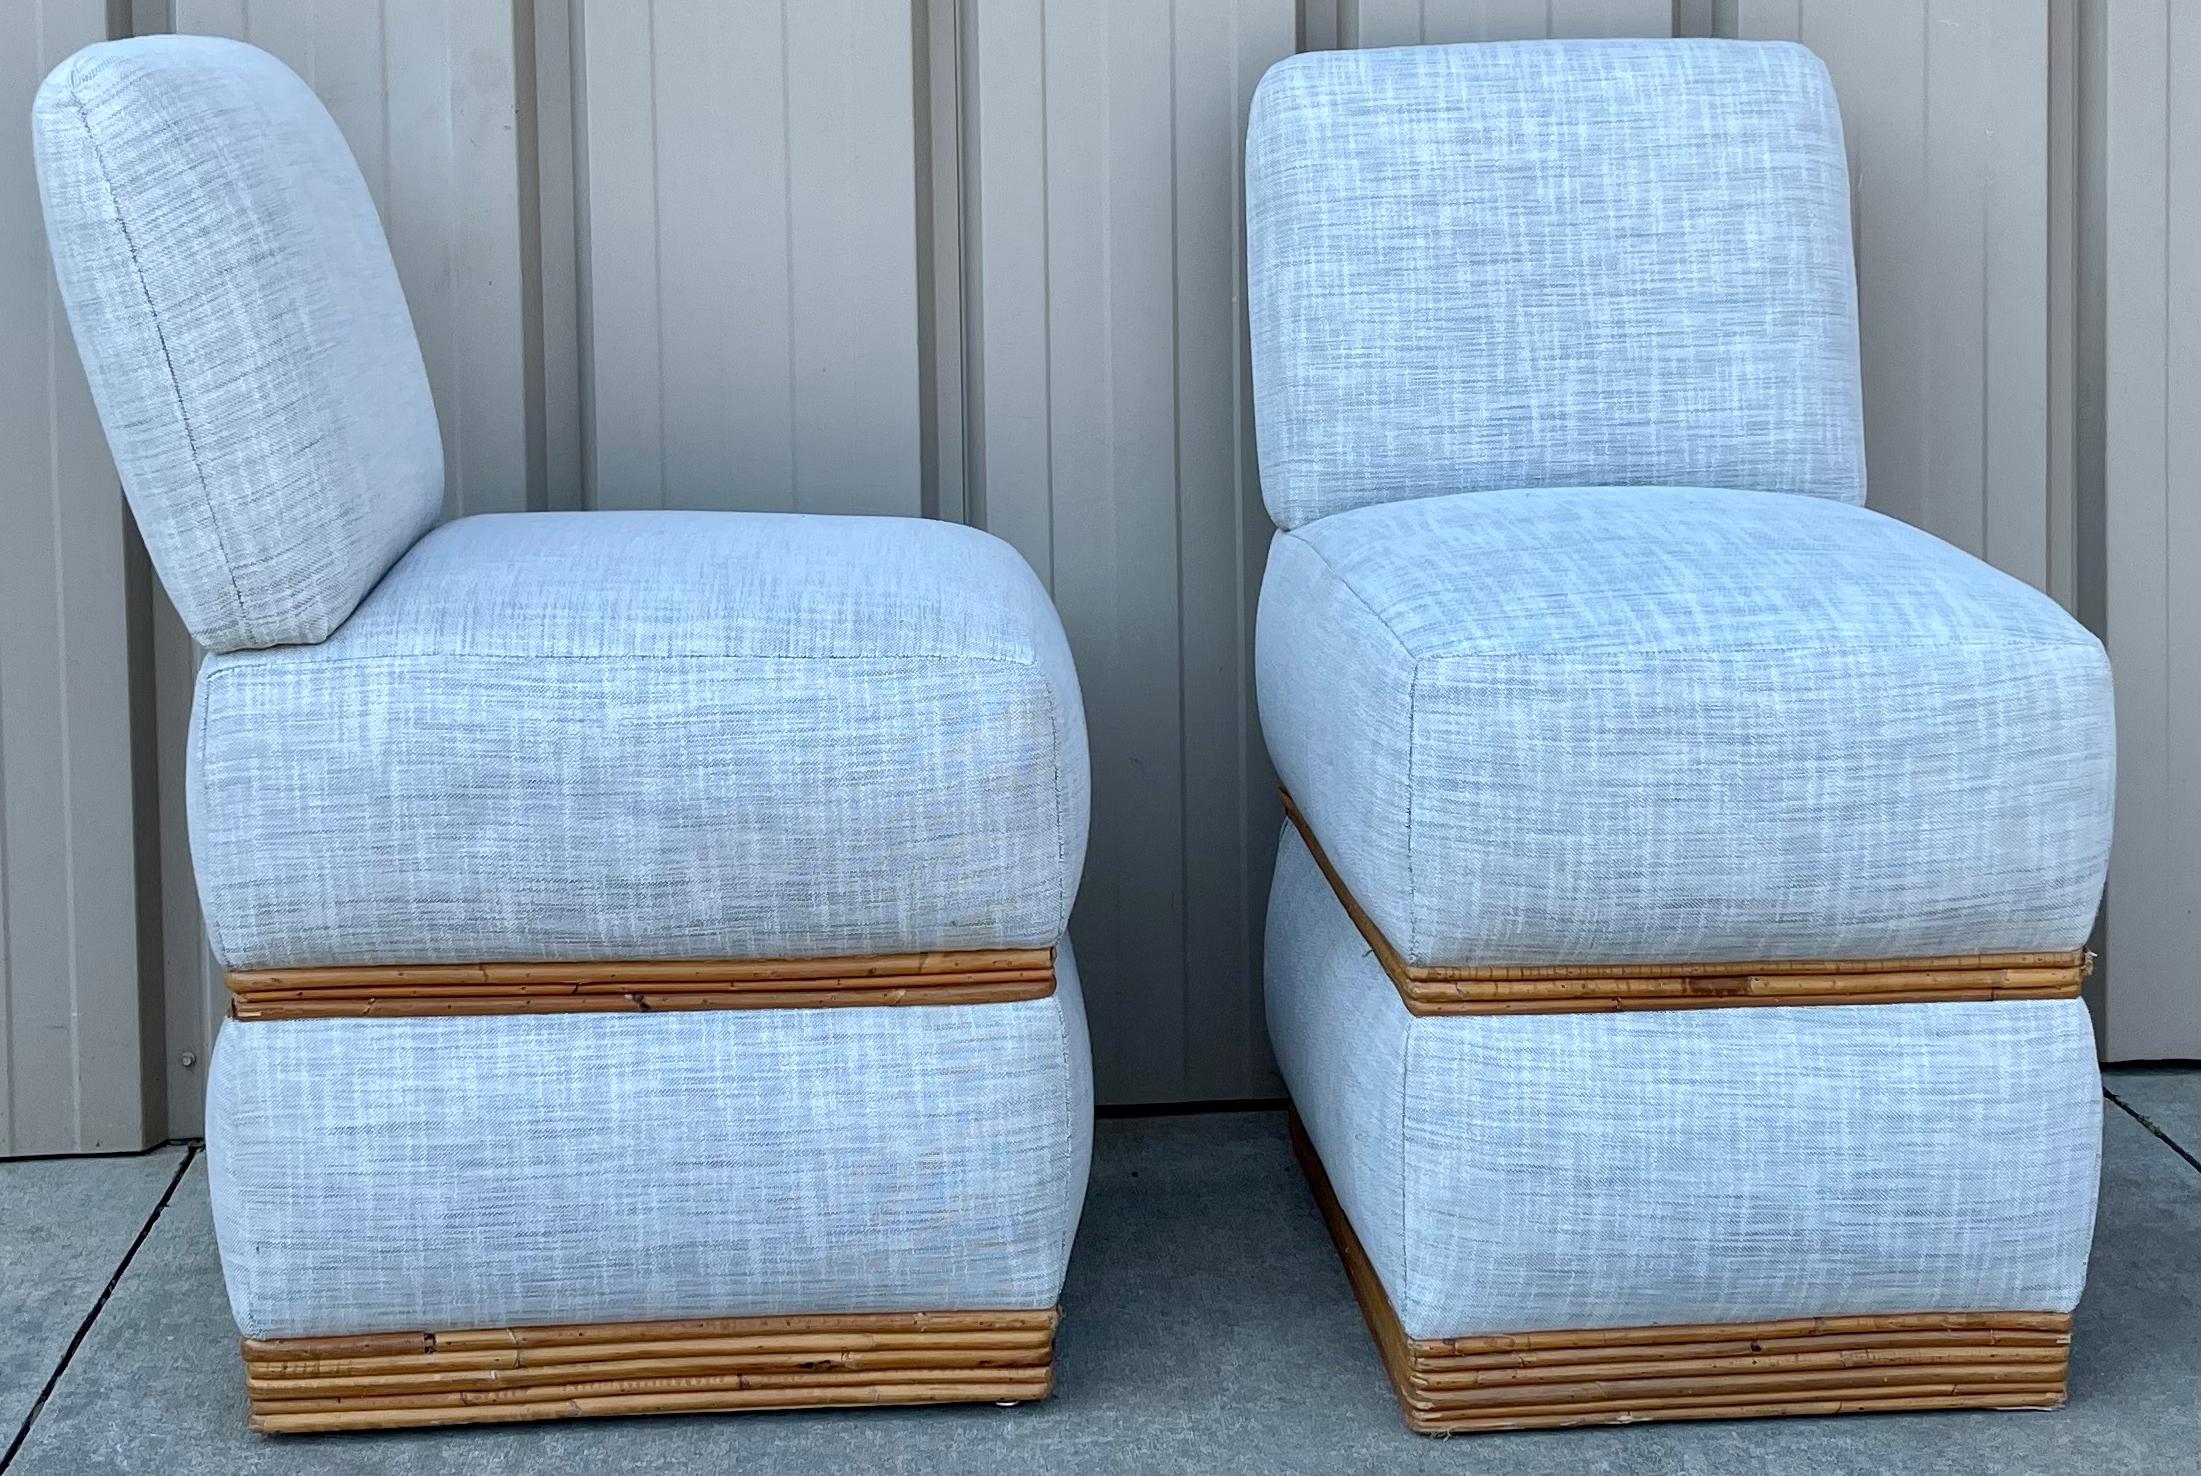 These have a great look! It is a pair of organic modern pencil bamboo and linen slipper chairs with pencil bamboo accents. The fabric is a blue gray linen.